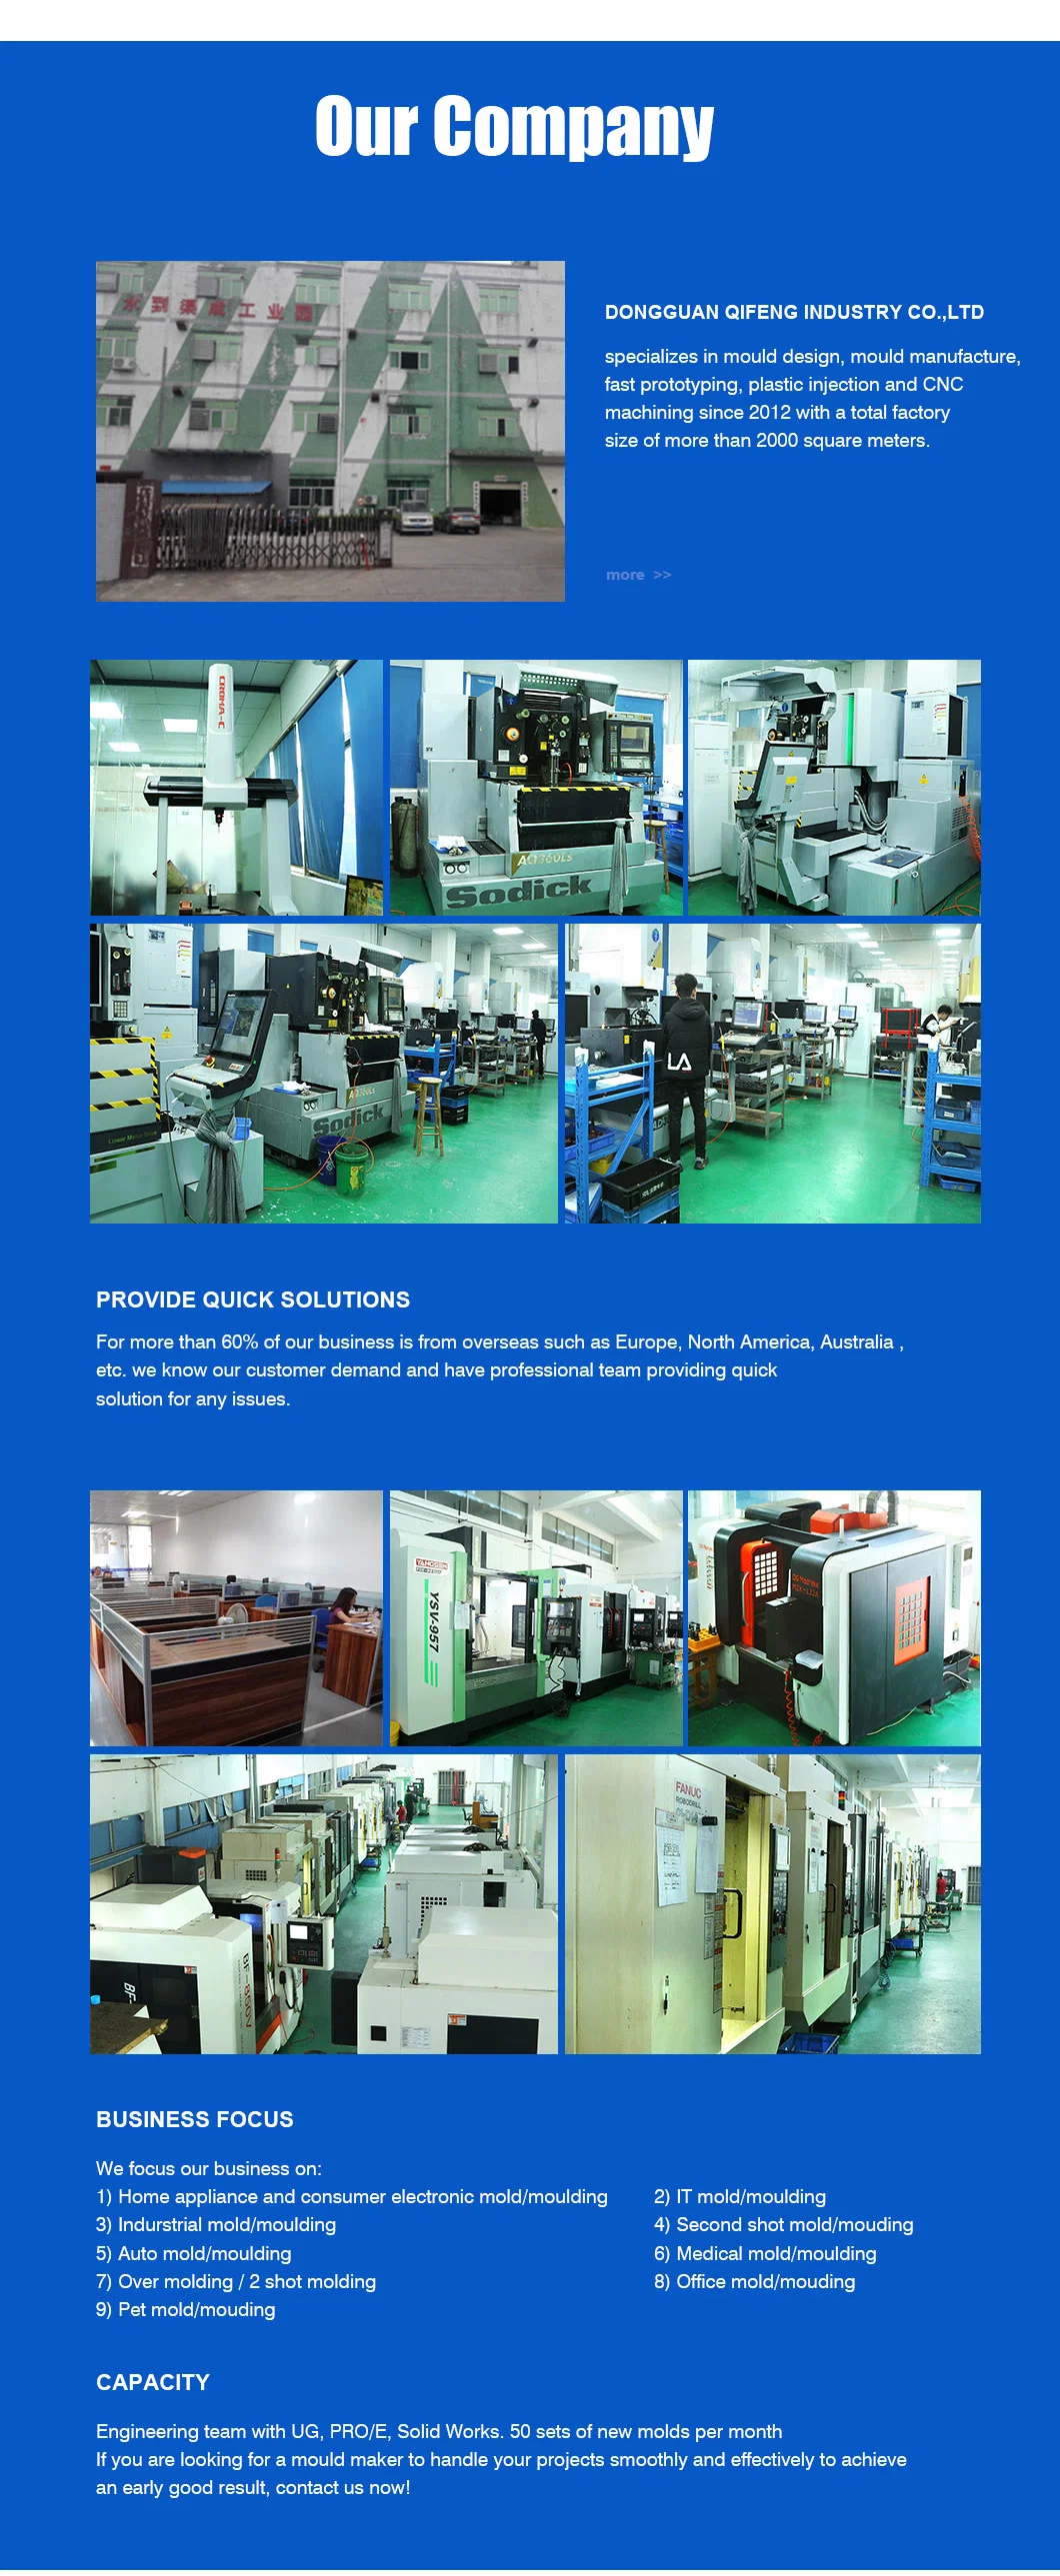 Precision Rapid Polypropylene Polymer Polycarbonate Injection Moulder Industrial Molds Tooling and Medical Thermoplastic MIM Metal Injection Molding